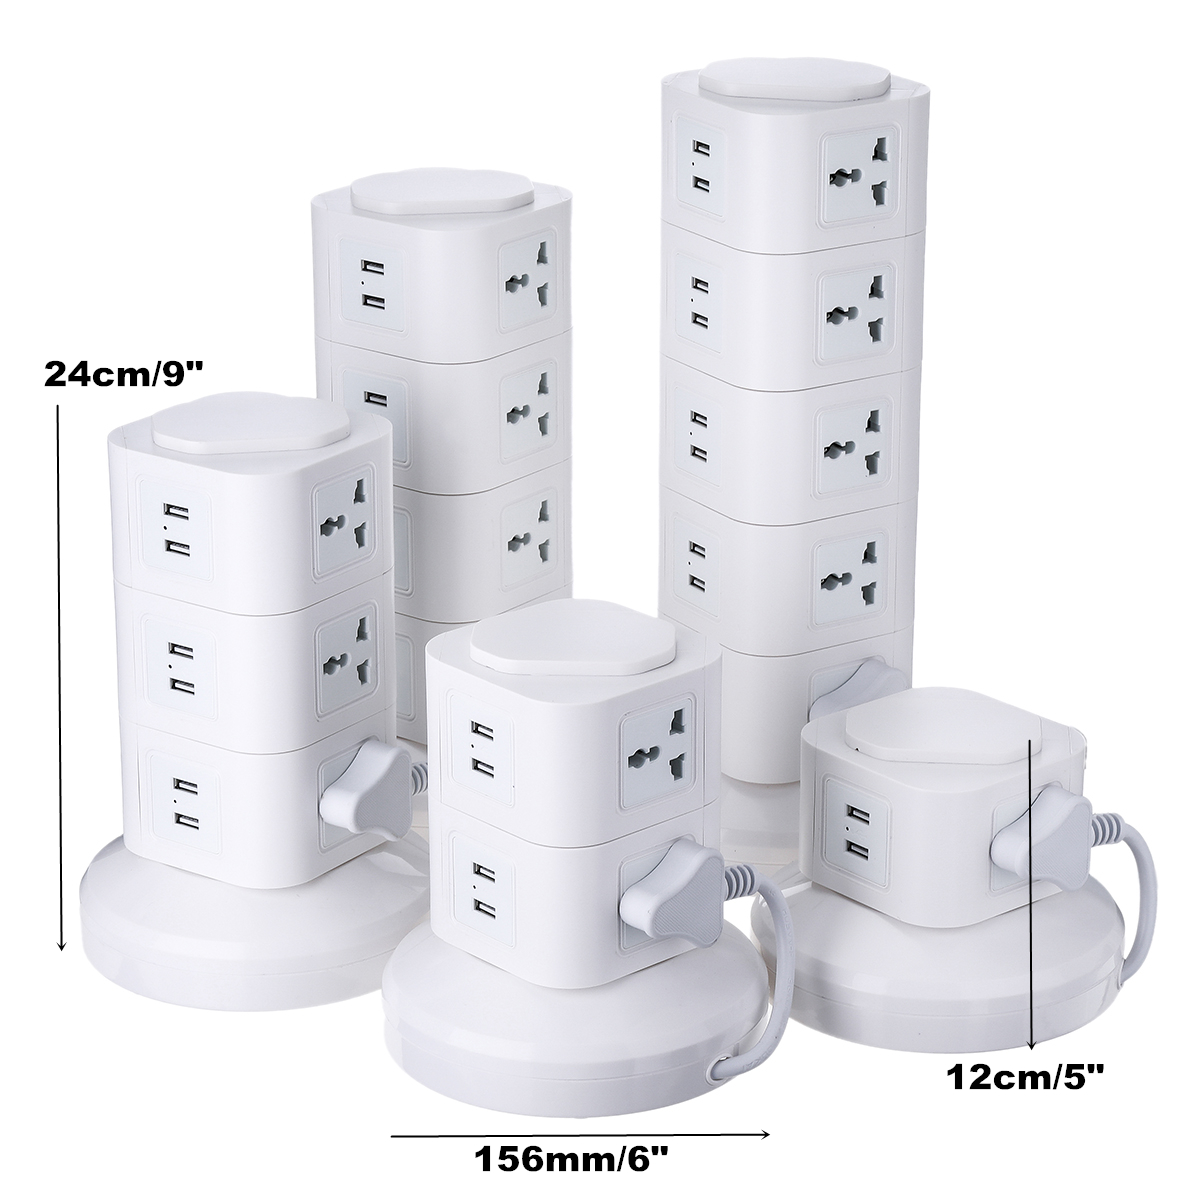 Vertical-Power-Socket-Powerboard-Outlet-Plug-Extension-Multi-USB-Ports-Charger-Socket-Power-Strip-1515996-2